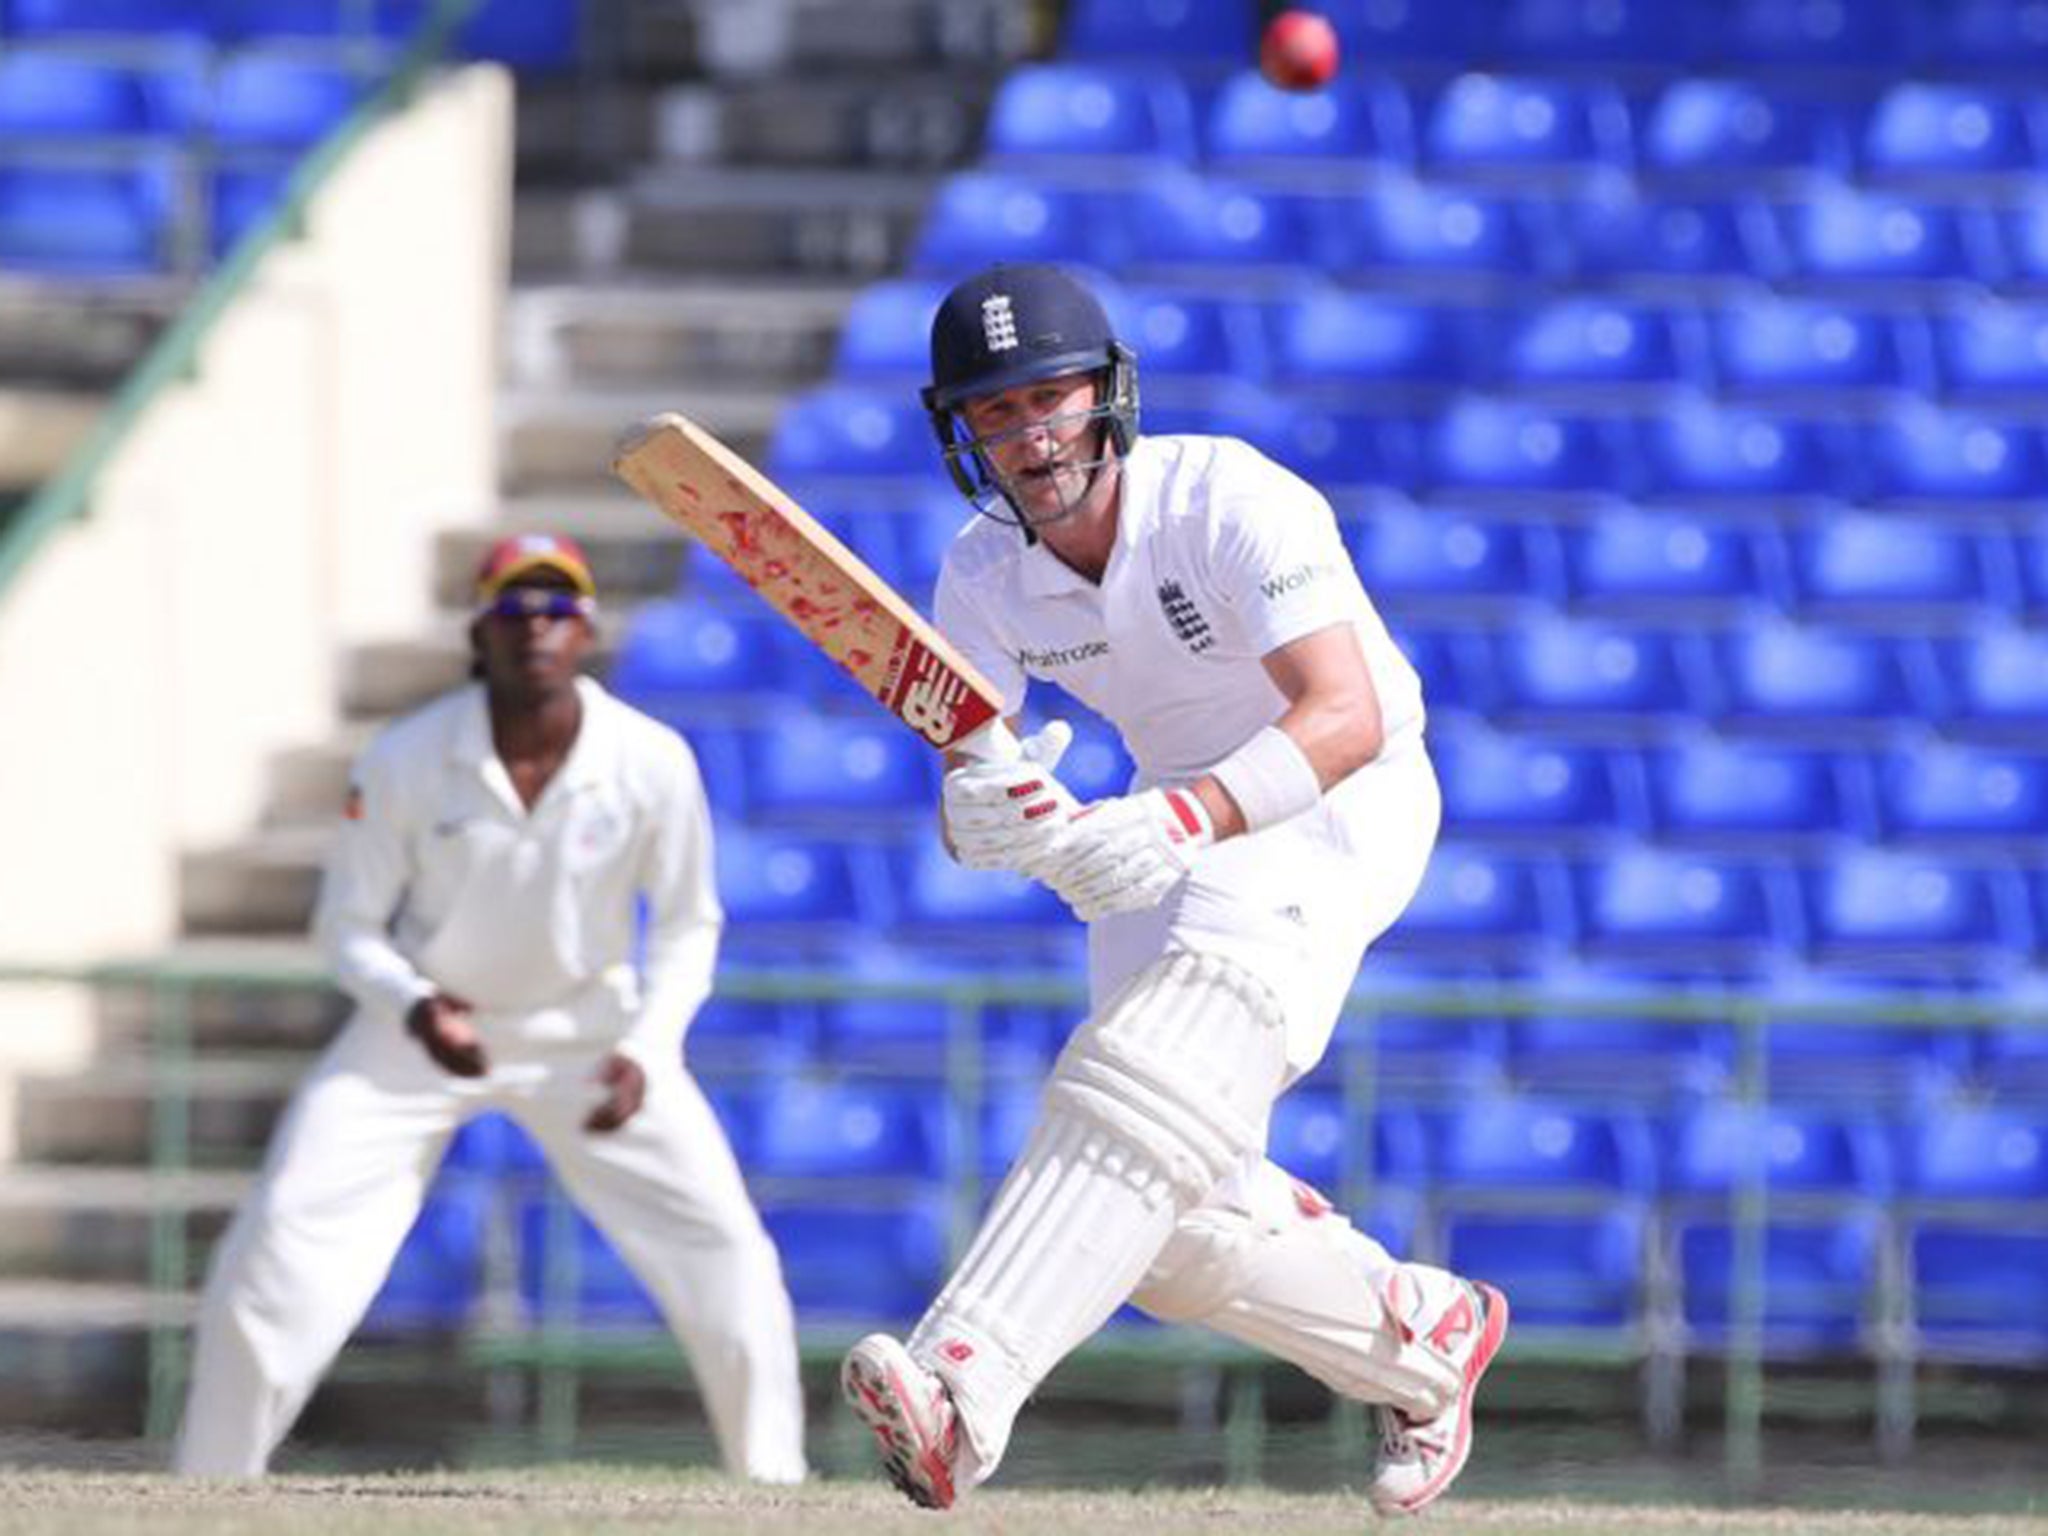 Jonathan Trott made a half-century on his return to the England side